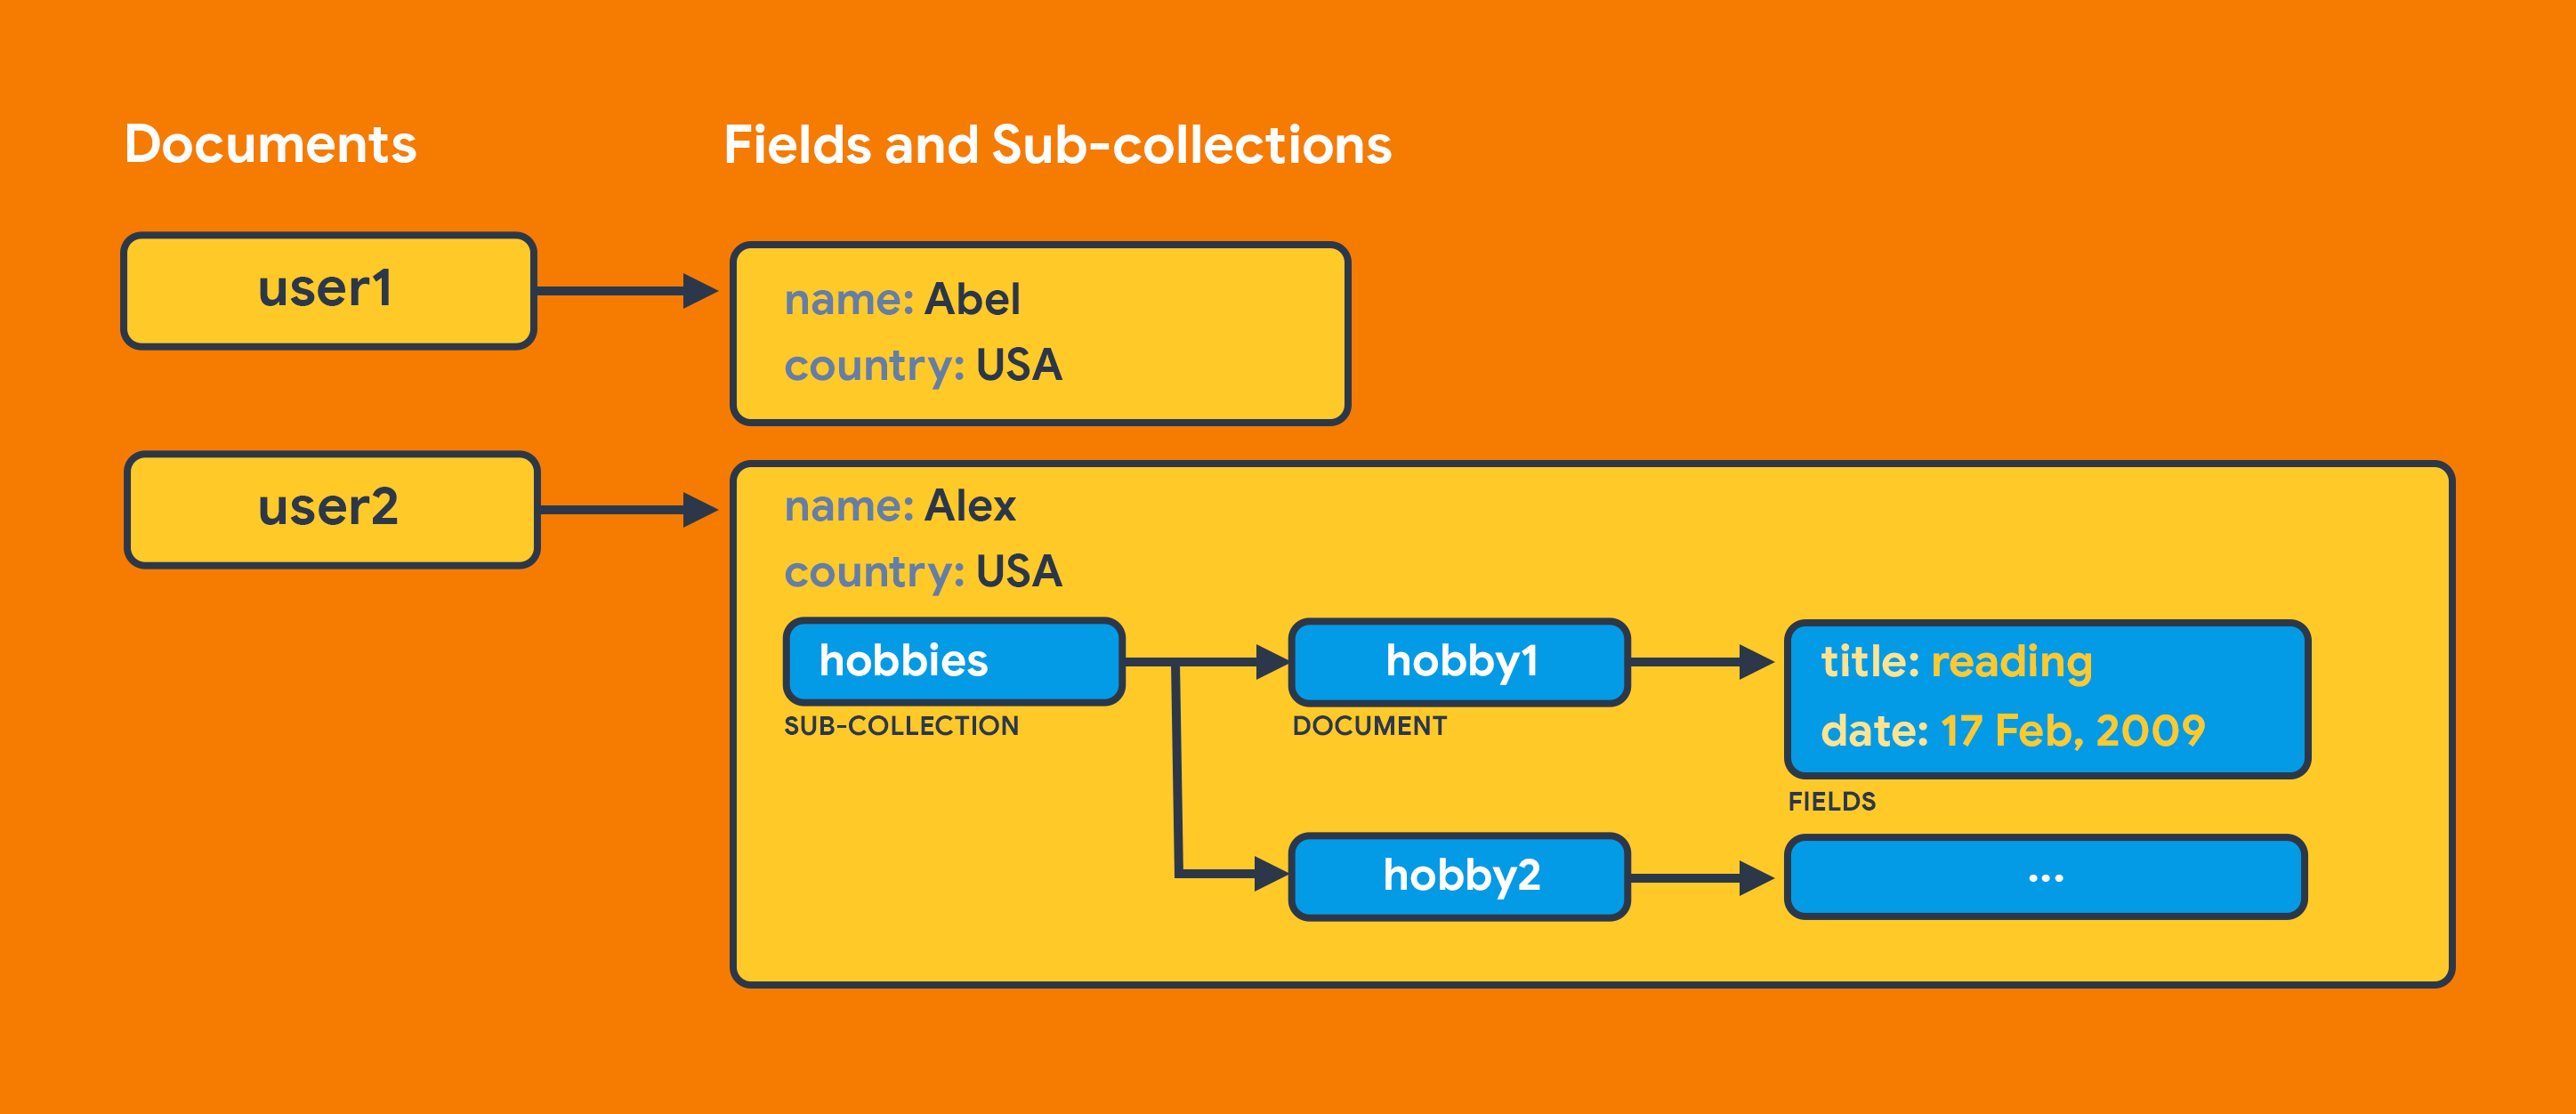 A document called "user1" containing two fields: name and country, and another document called "user2" containing two fields: name and country along with a sub-collection called "hobbies"